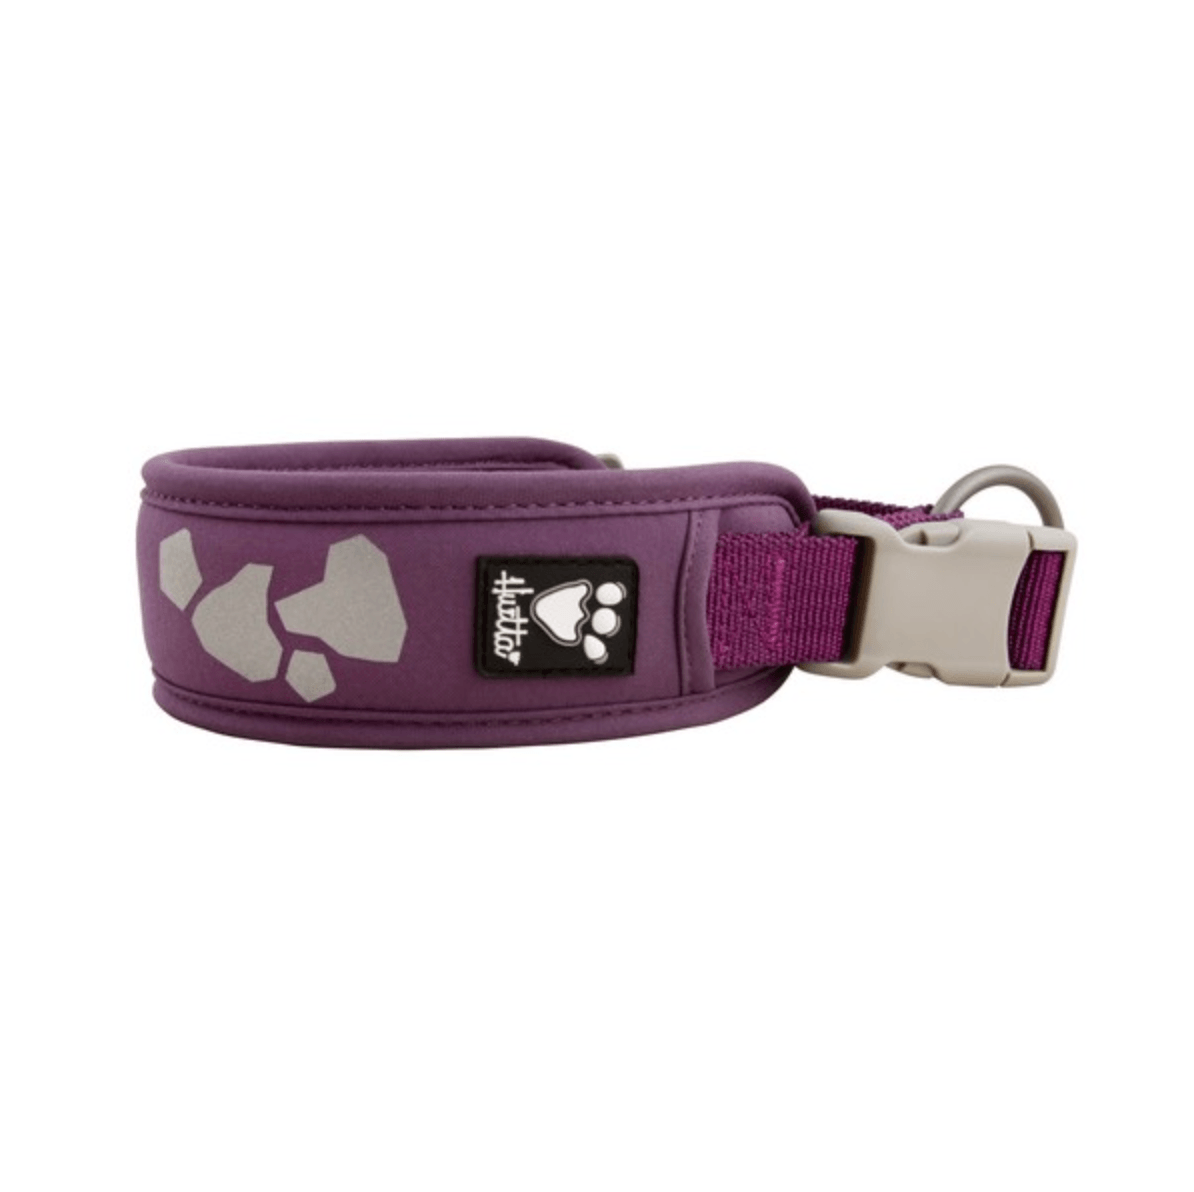 Hurtta Weekend Warrior Dog Collar (Currant) - Pet's Play Toy Store